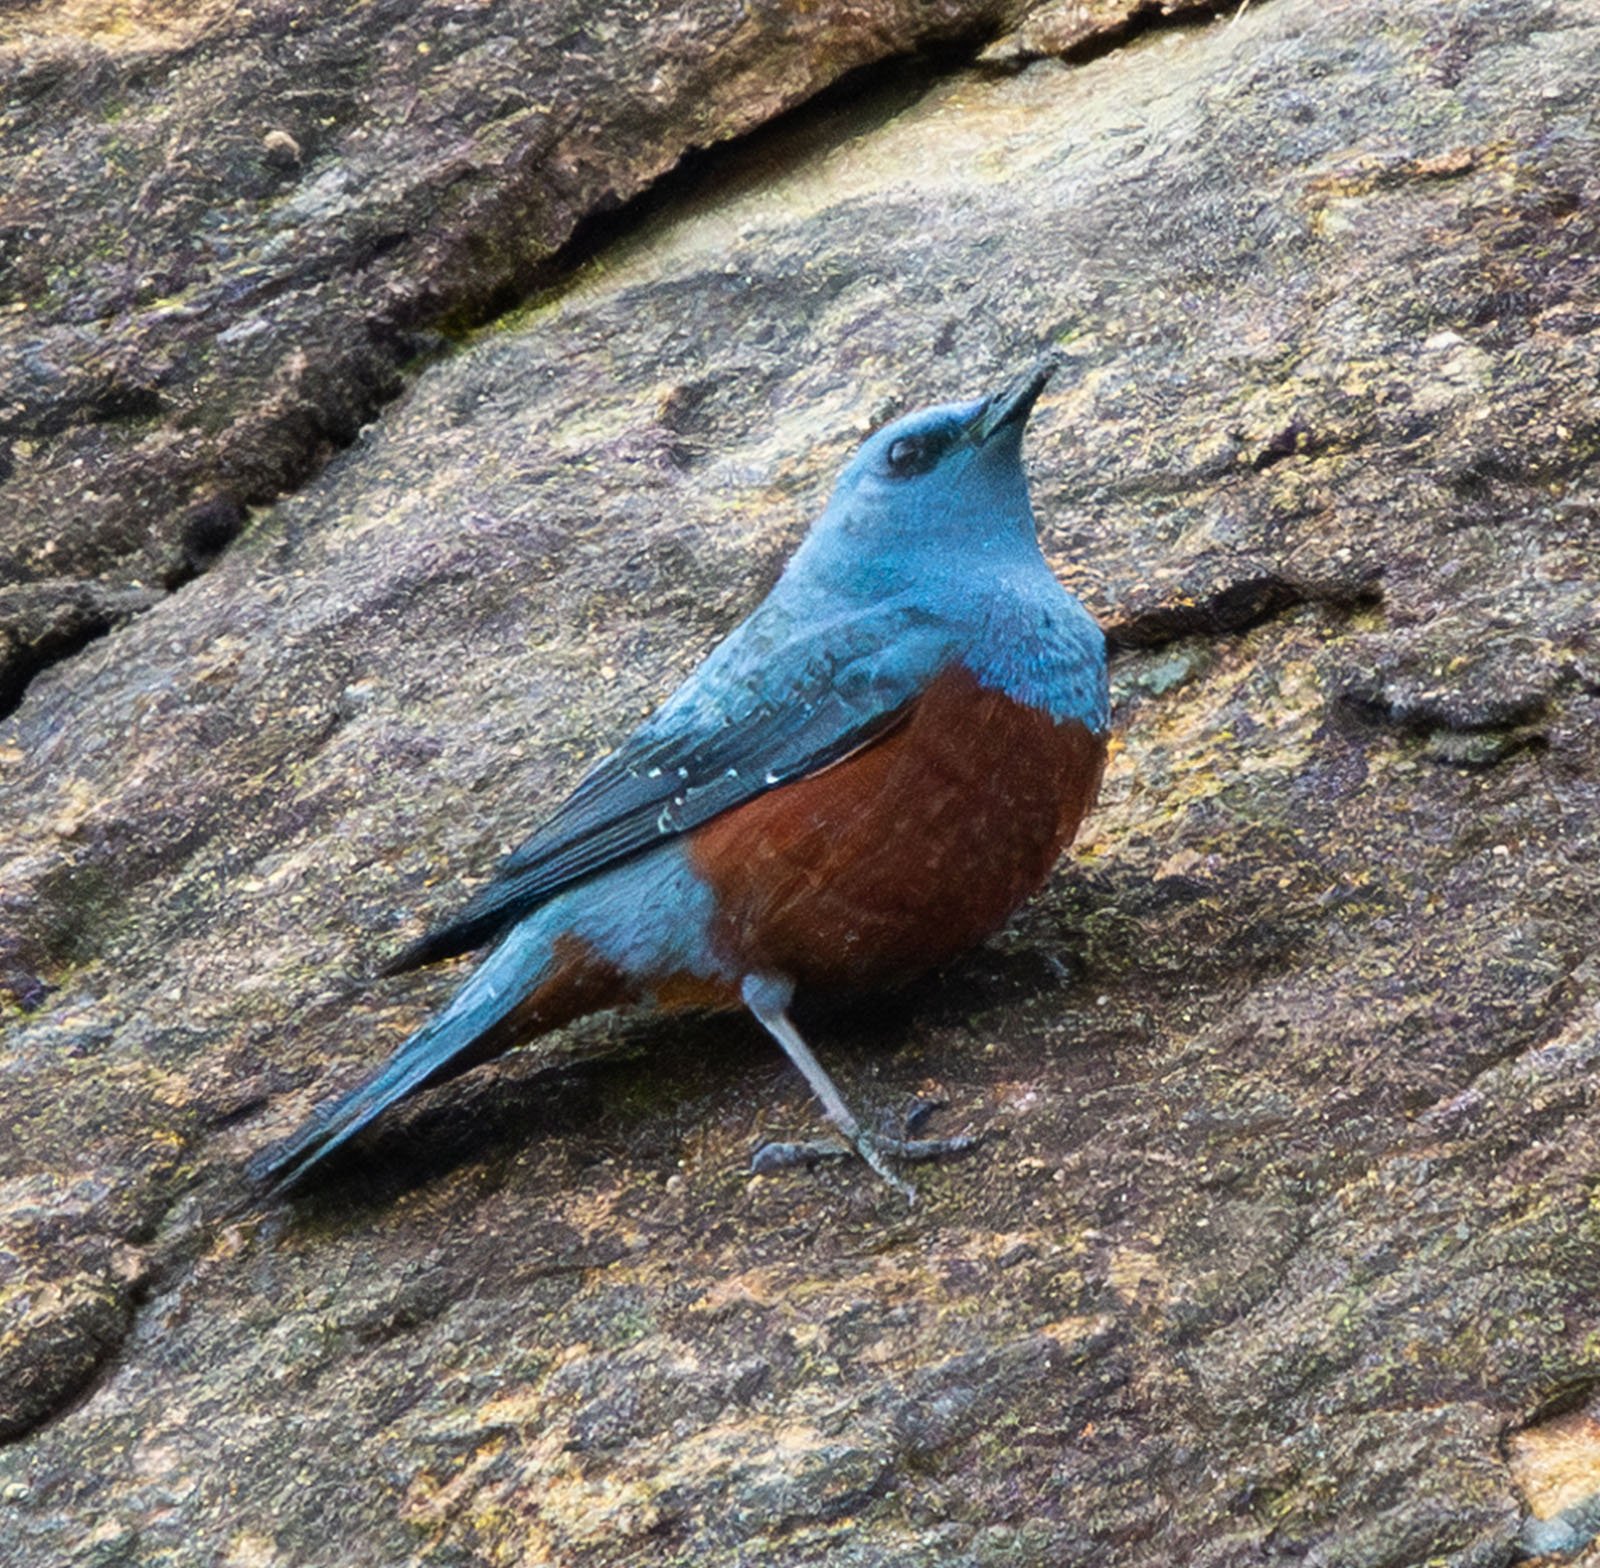 A vibrant chestnut-bellied blue bird perched on a textured rock surface, showing detailed blue and brown plumage.